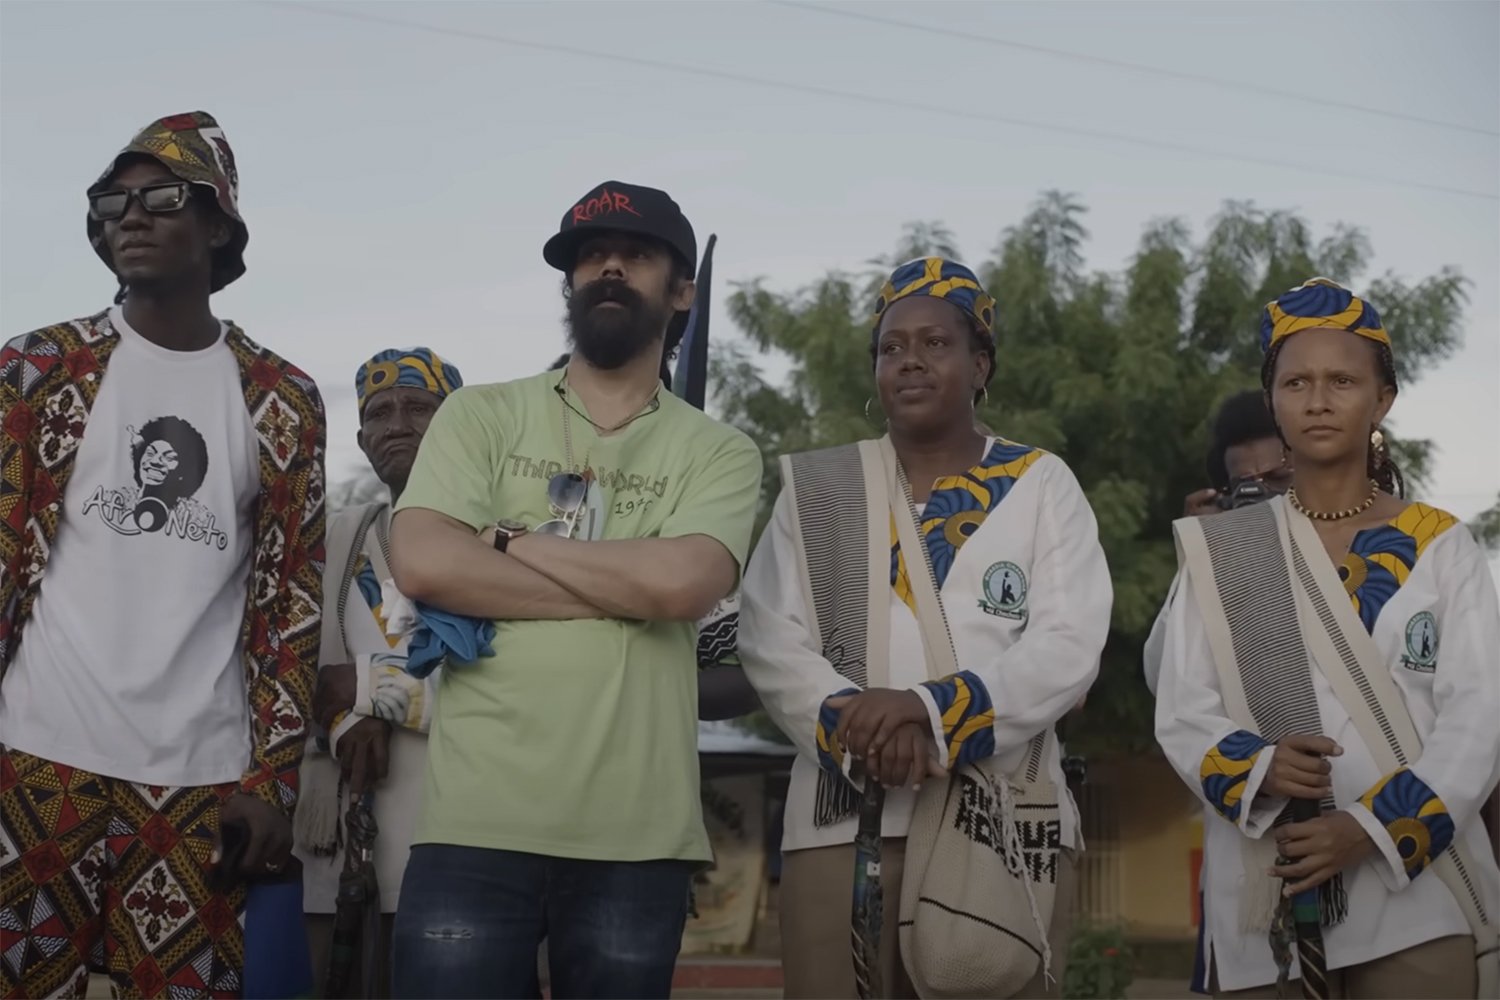 Damian Marley Puts Spotlight On First Free Town For Africans In The Americas